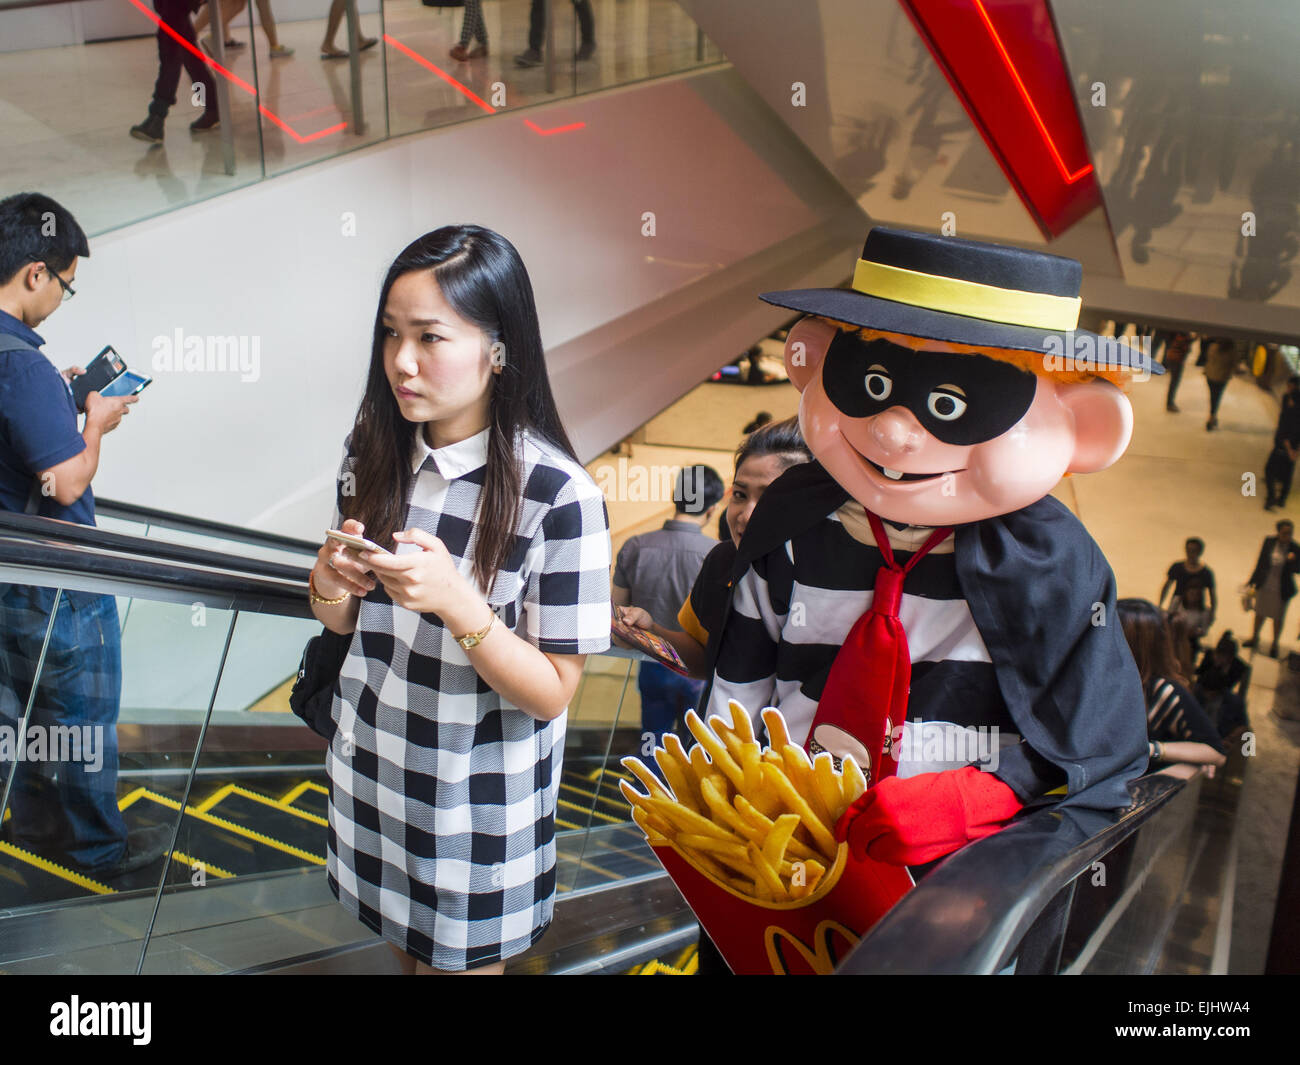 March 27, 2015 - Bangkok, Bangkok, Thailand - A woman rides an escalator ahead of the ''Hamburglar, '' a fast food character used to promote McDonald's restaurants in Thailand, in ''EmQuartier, '' a new mall in Bangkok. ''EmQuartier'' is across Sukhumvit Rd from Emporium. Both malls have the same corporate owner, The Mall Group, which reportedly spent 20Billion Thai Baht (about $600 million US) on the new mall and renovating the existing Emporium. EmQuartier and Emporium have about 450,000 square meters of retail, several hotels, numerous restaurants, movie theaters and the largest man made wa Stock Photo